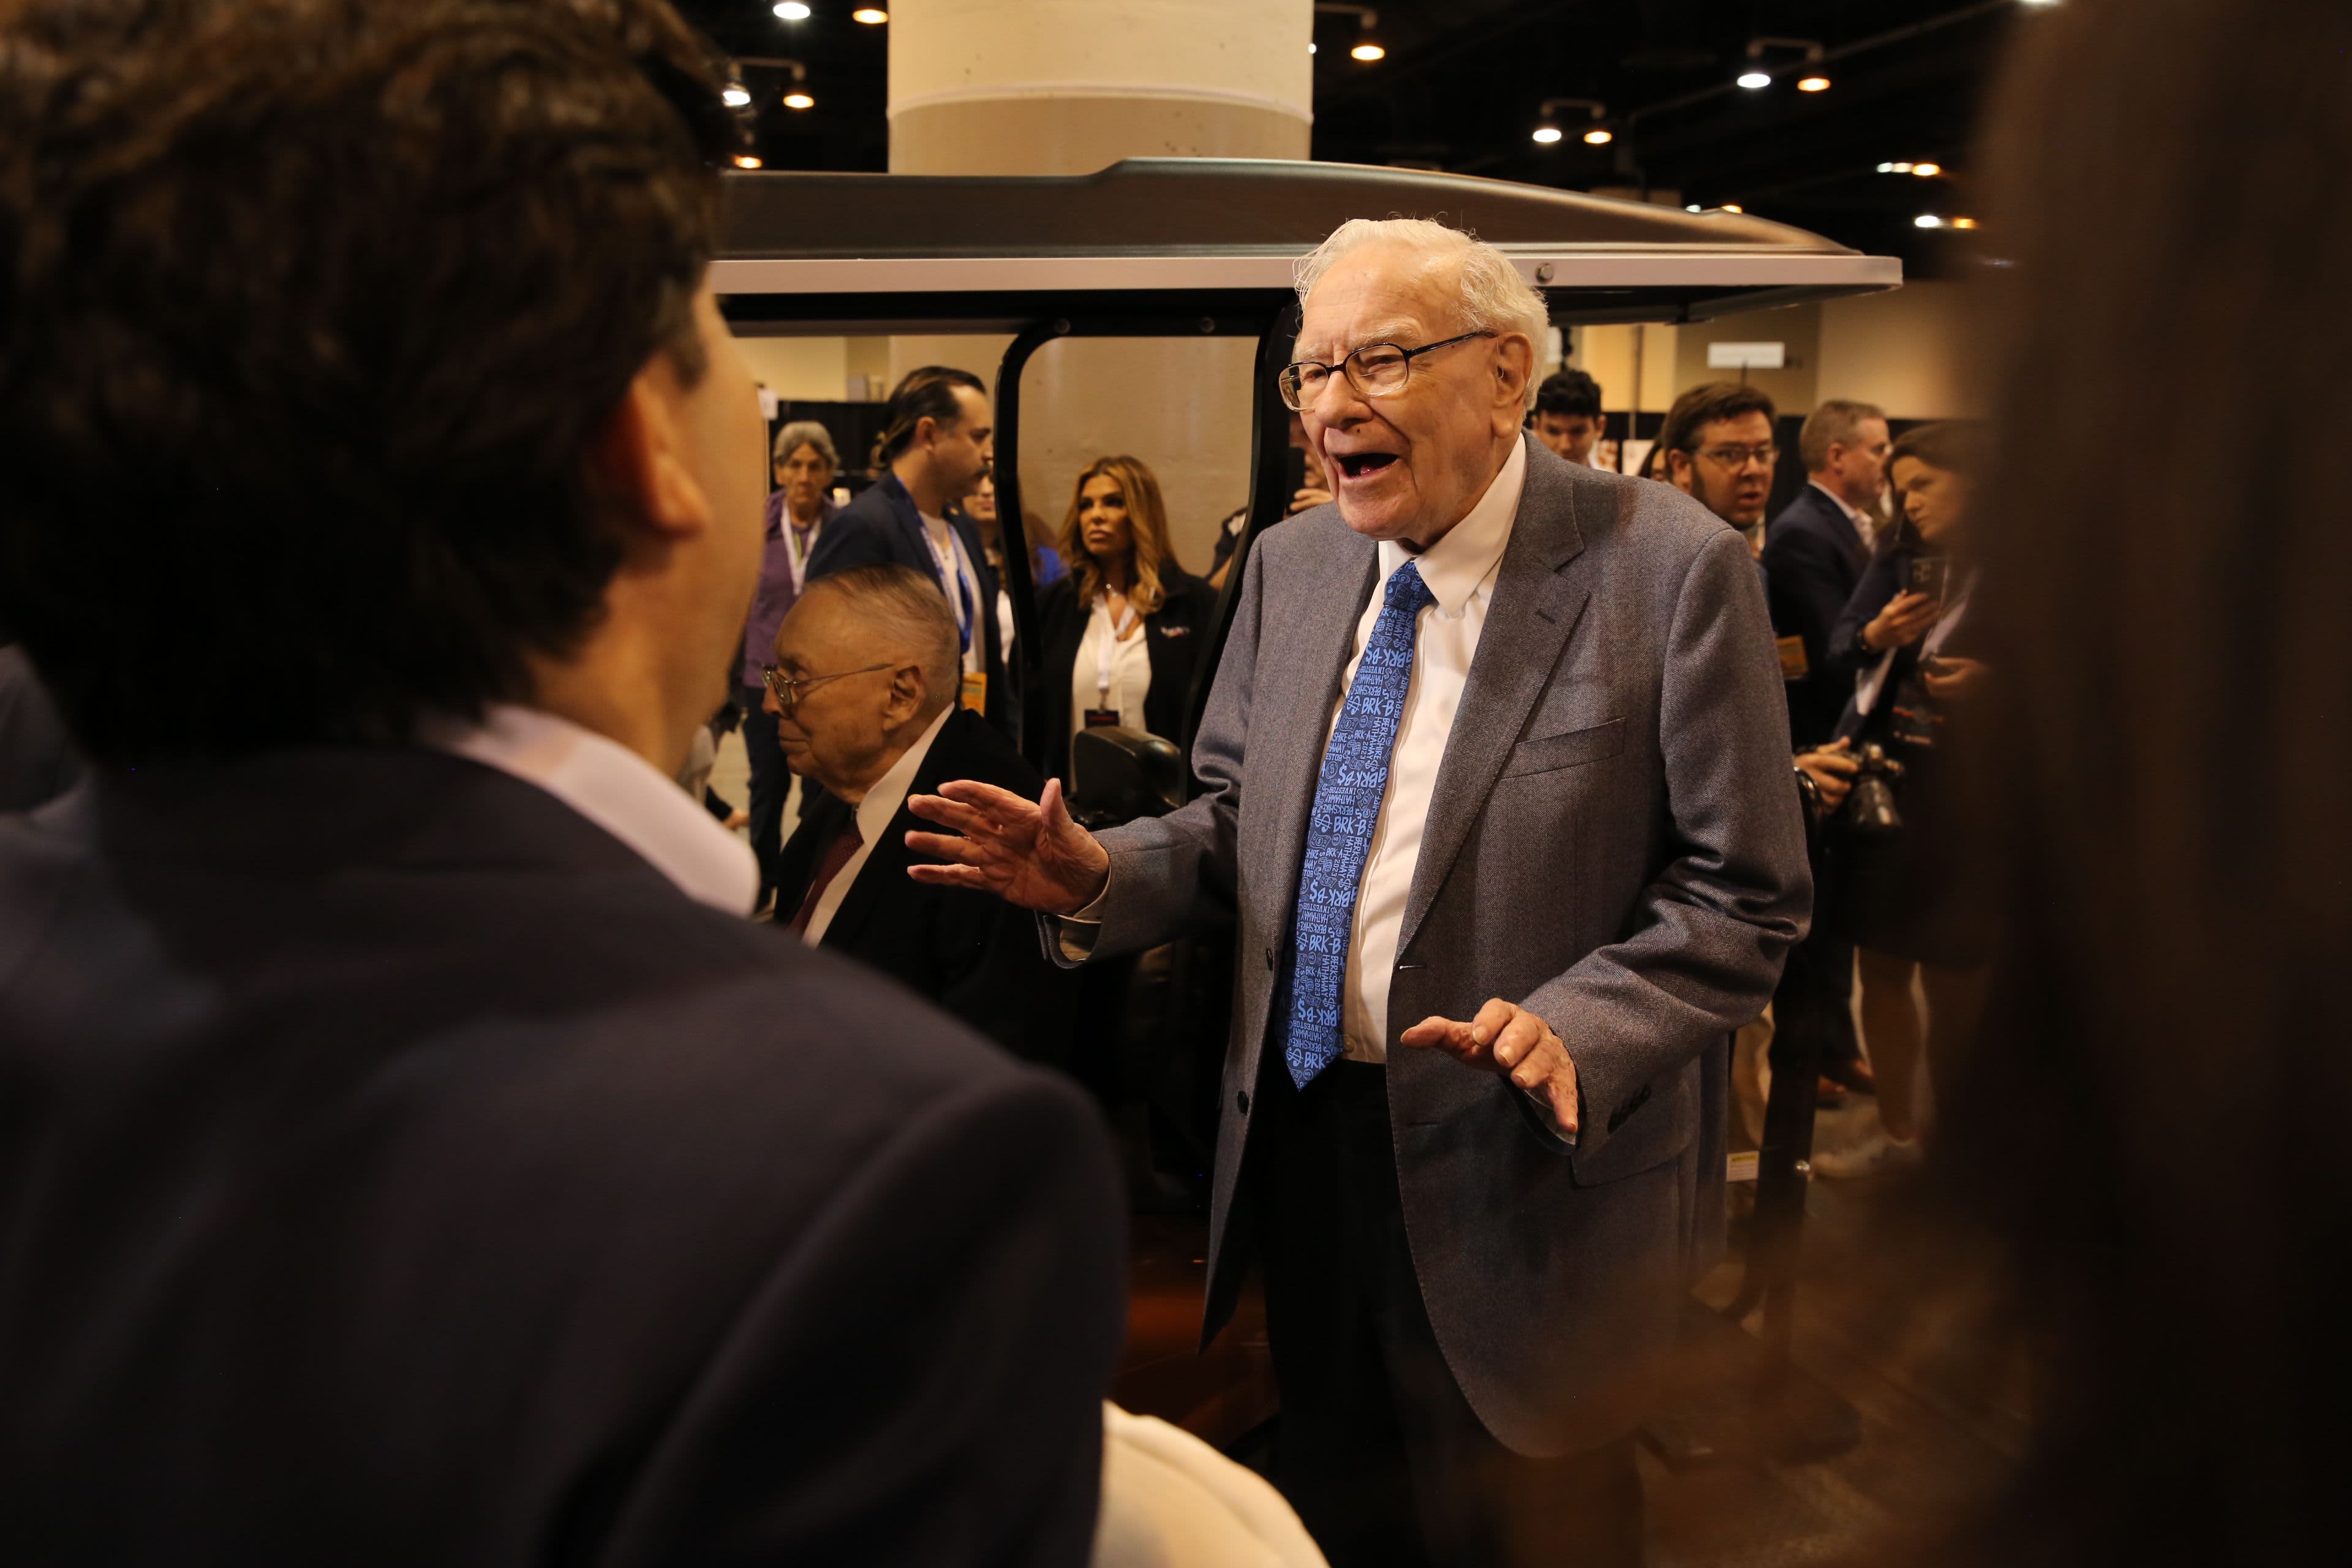 Just 5 stocks make up the lion's share of Warren Buffett's equity portfolio. Here’s what they are